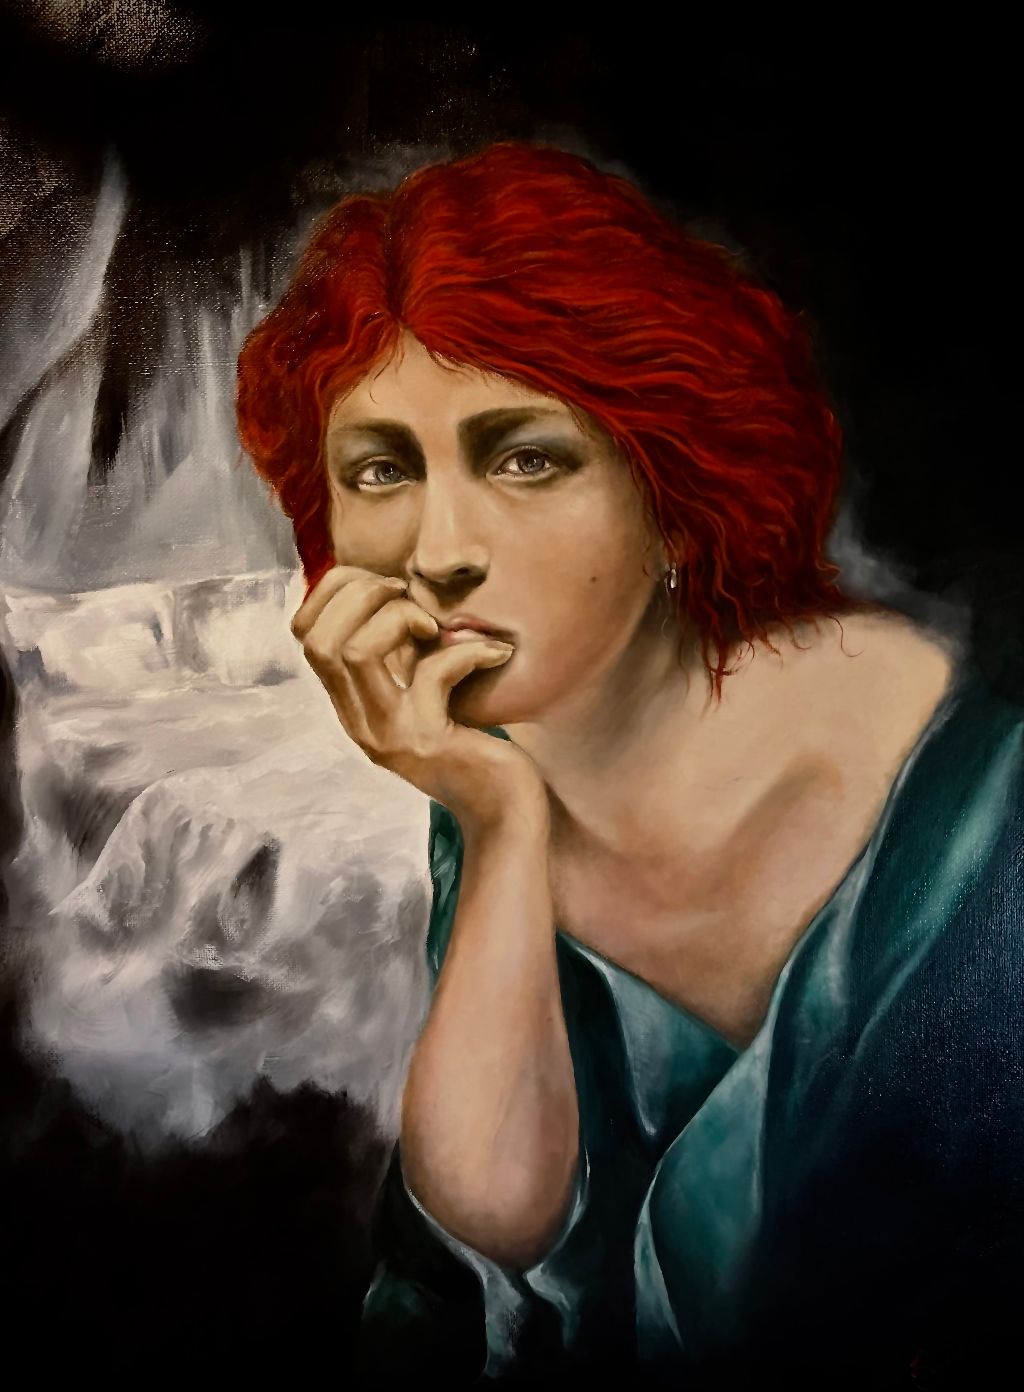 Scarlet Lady
Oil
Michael Barilla
16 in X 20 in
Red headed woman deep in thought in her bedroom.